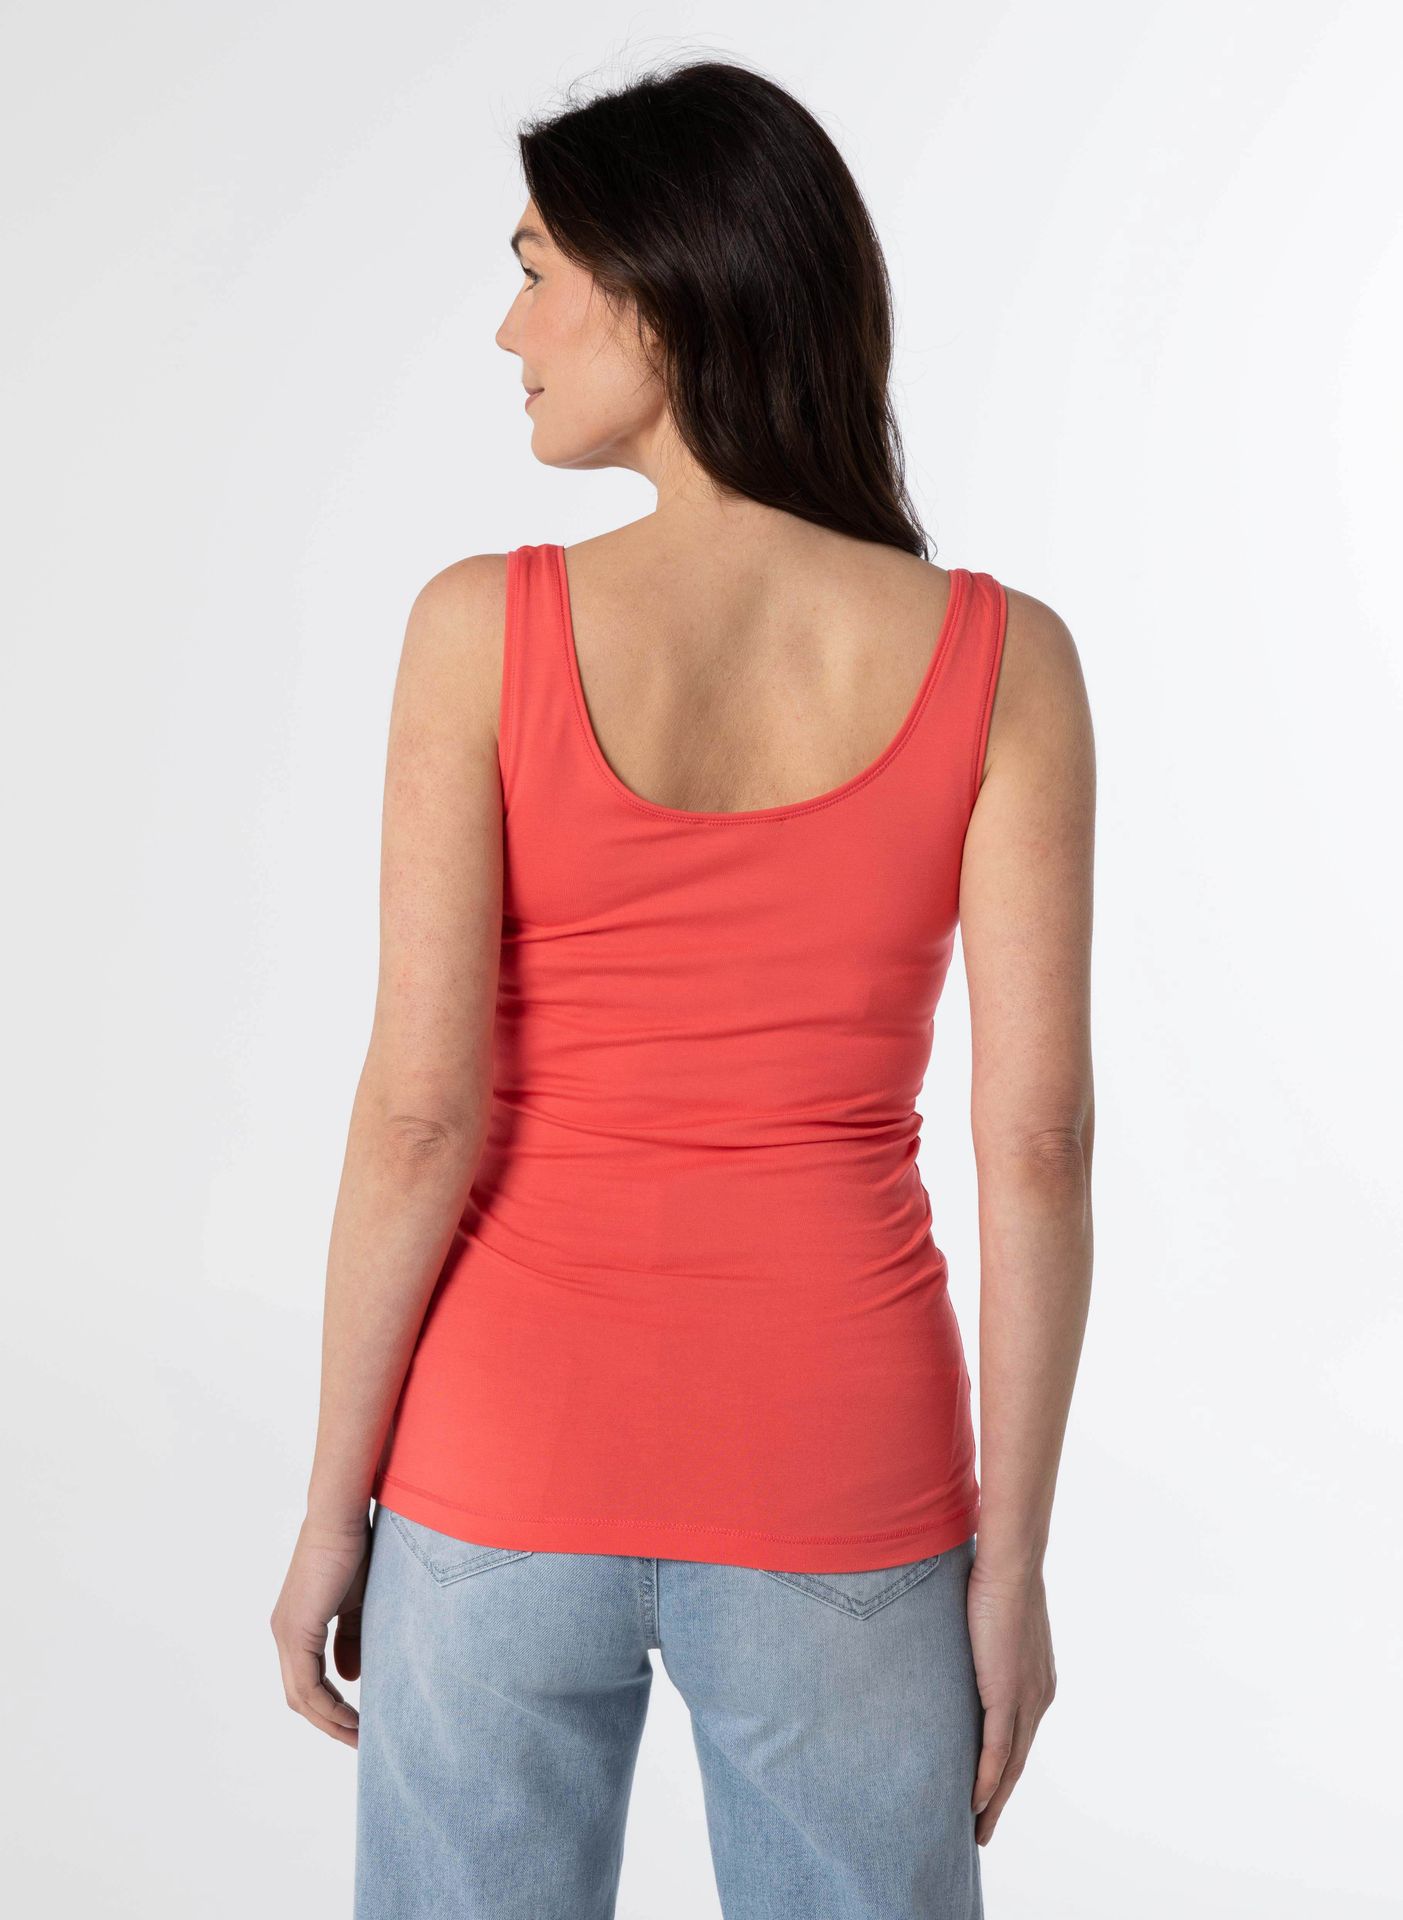 Norah Top Marianne roze coral 212247-706